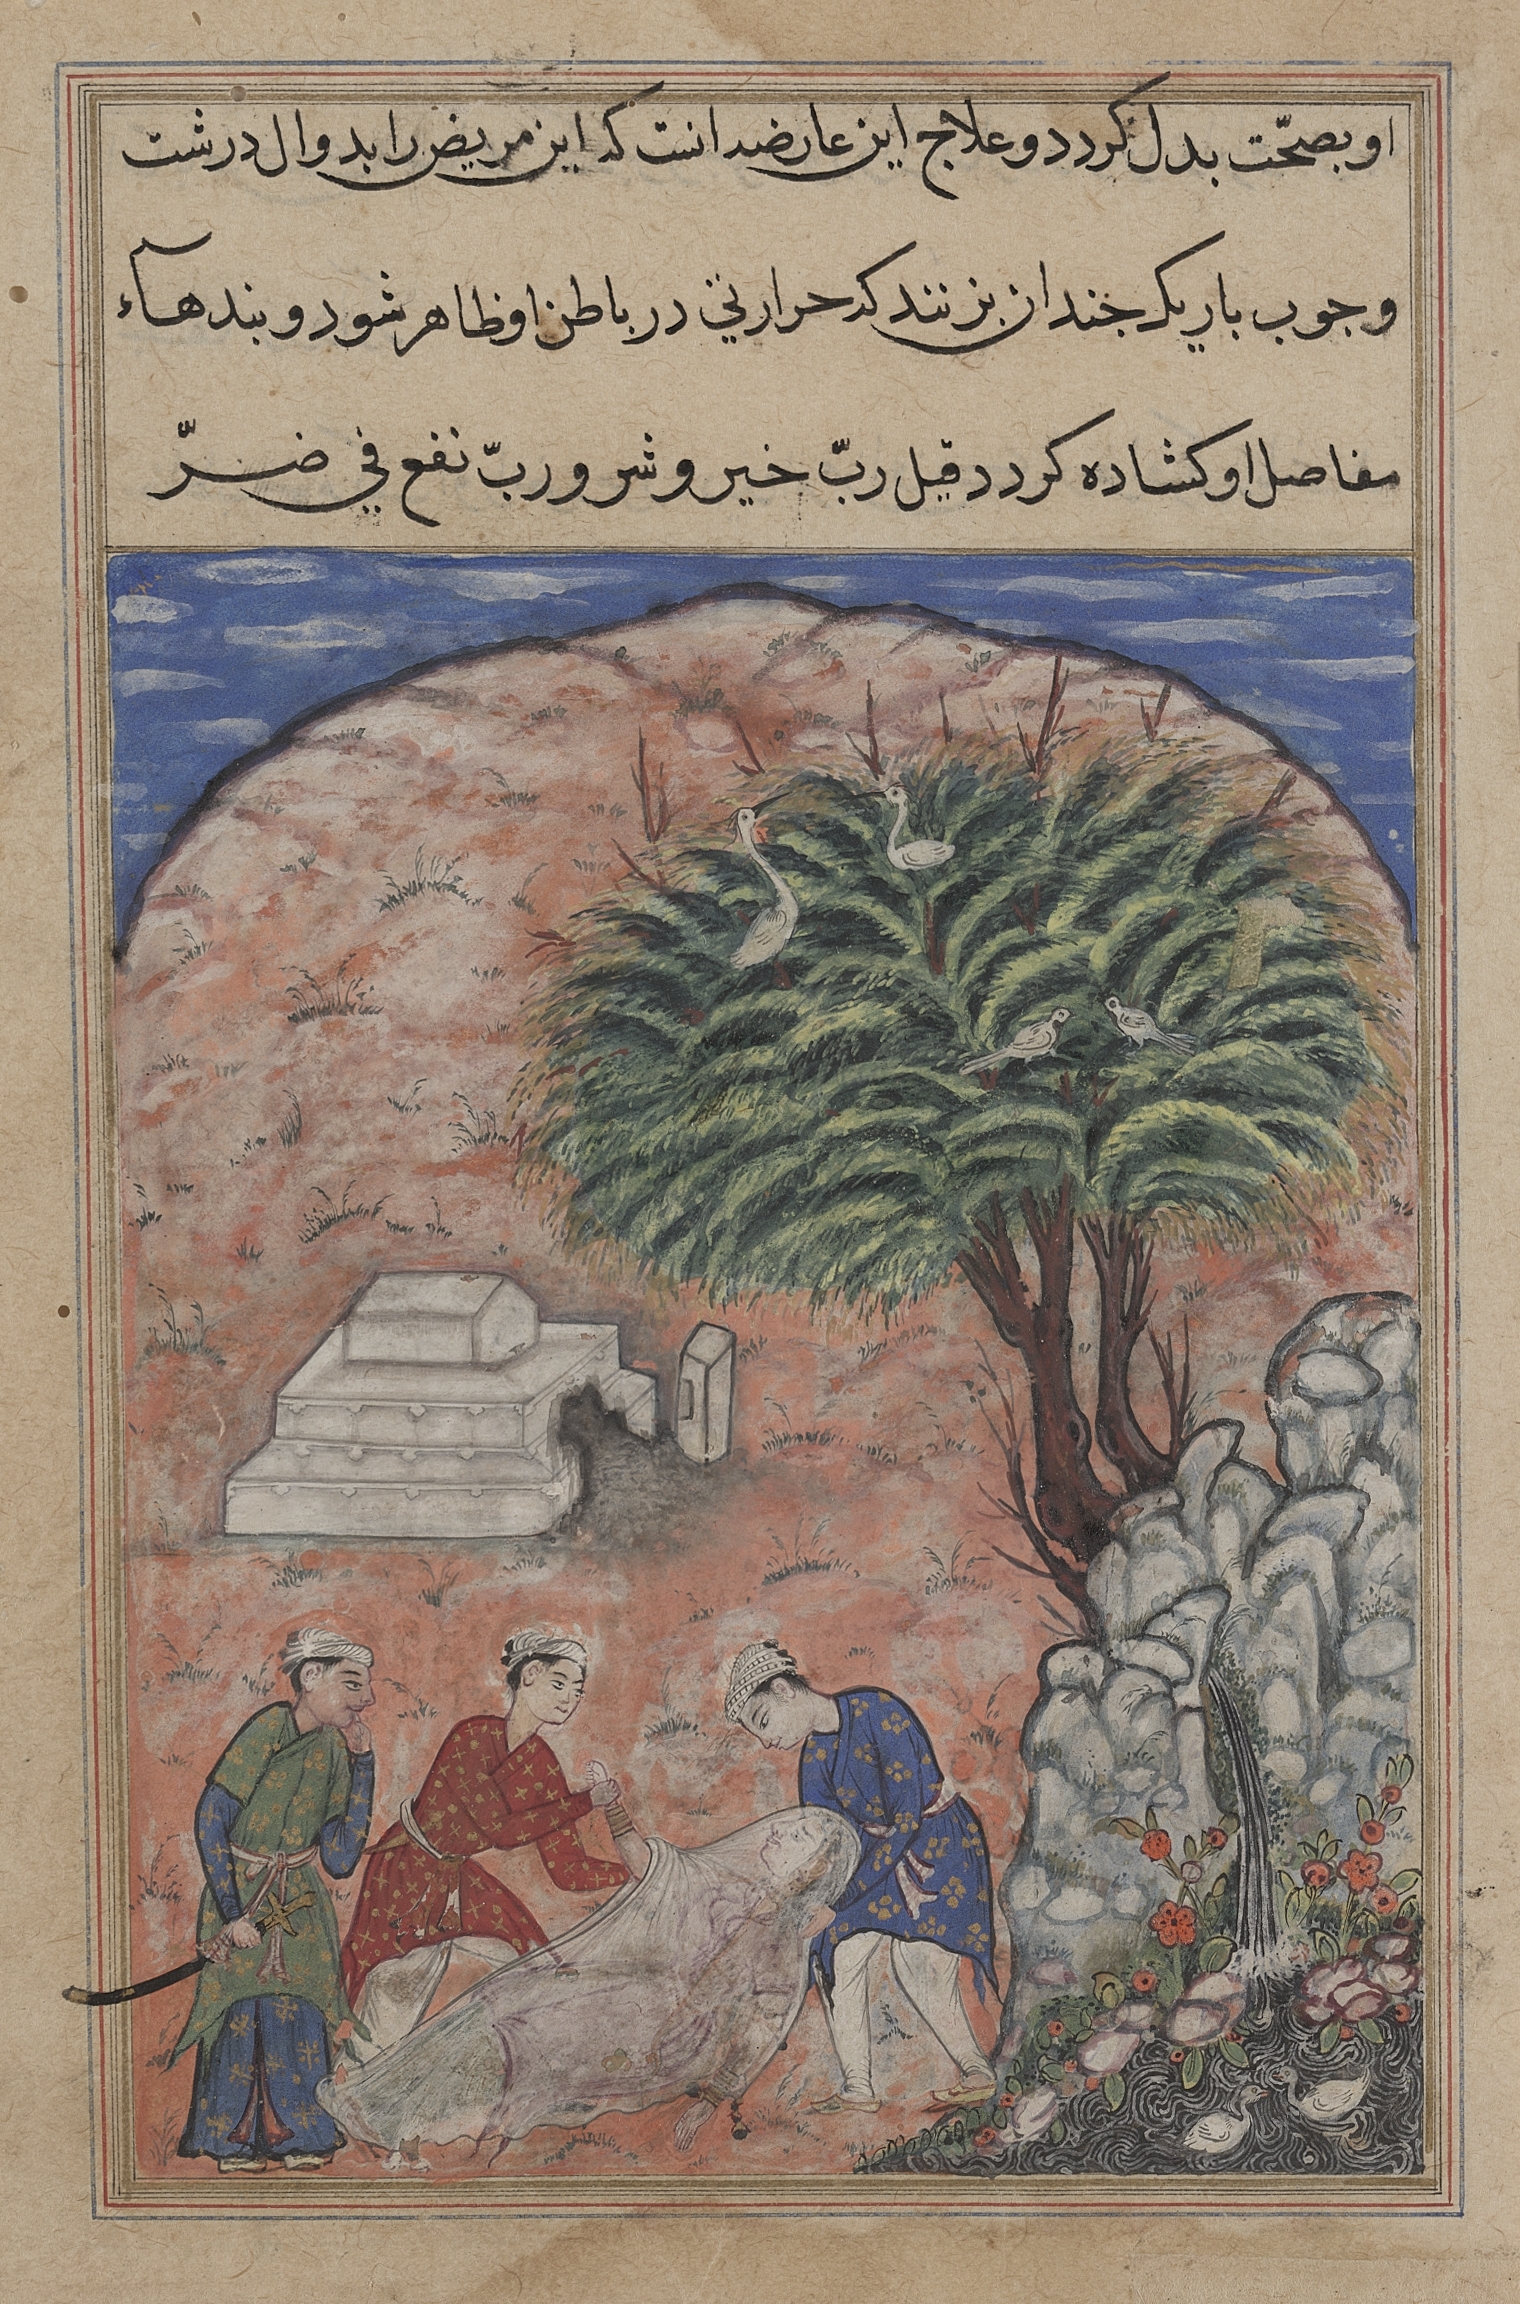 The suitors take the devotee’s daughter out of her tomb after breaking it open, when the physician discovers she is still alive, from a Tuti-nama (Tales of a Parrot): Twentieth Night